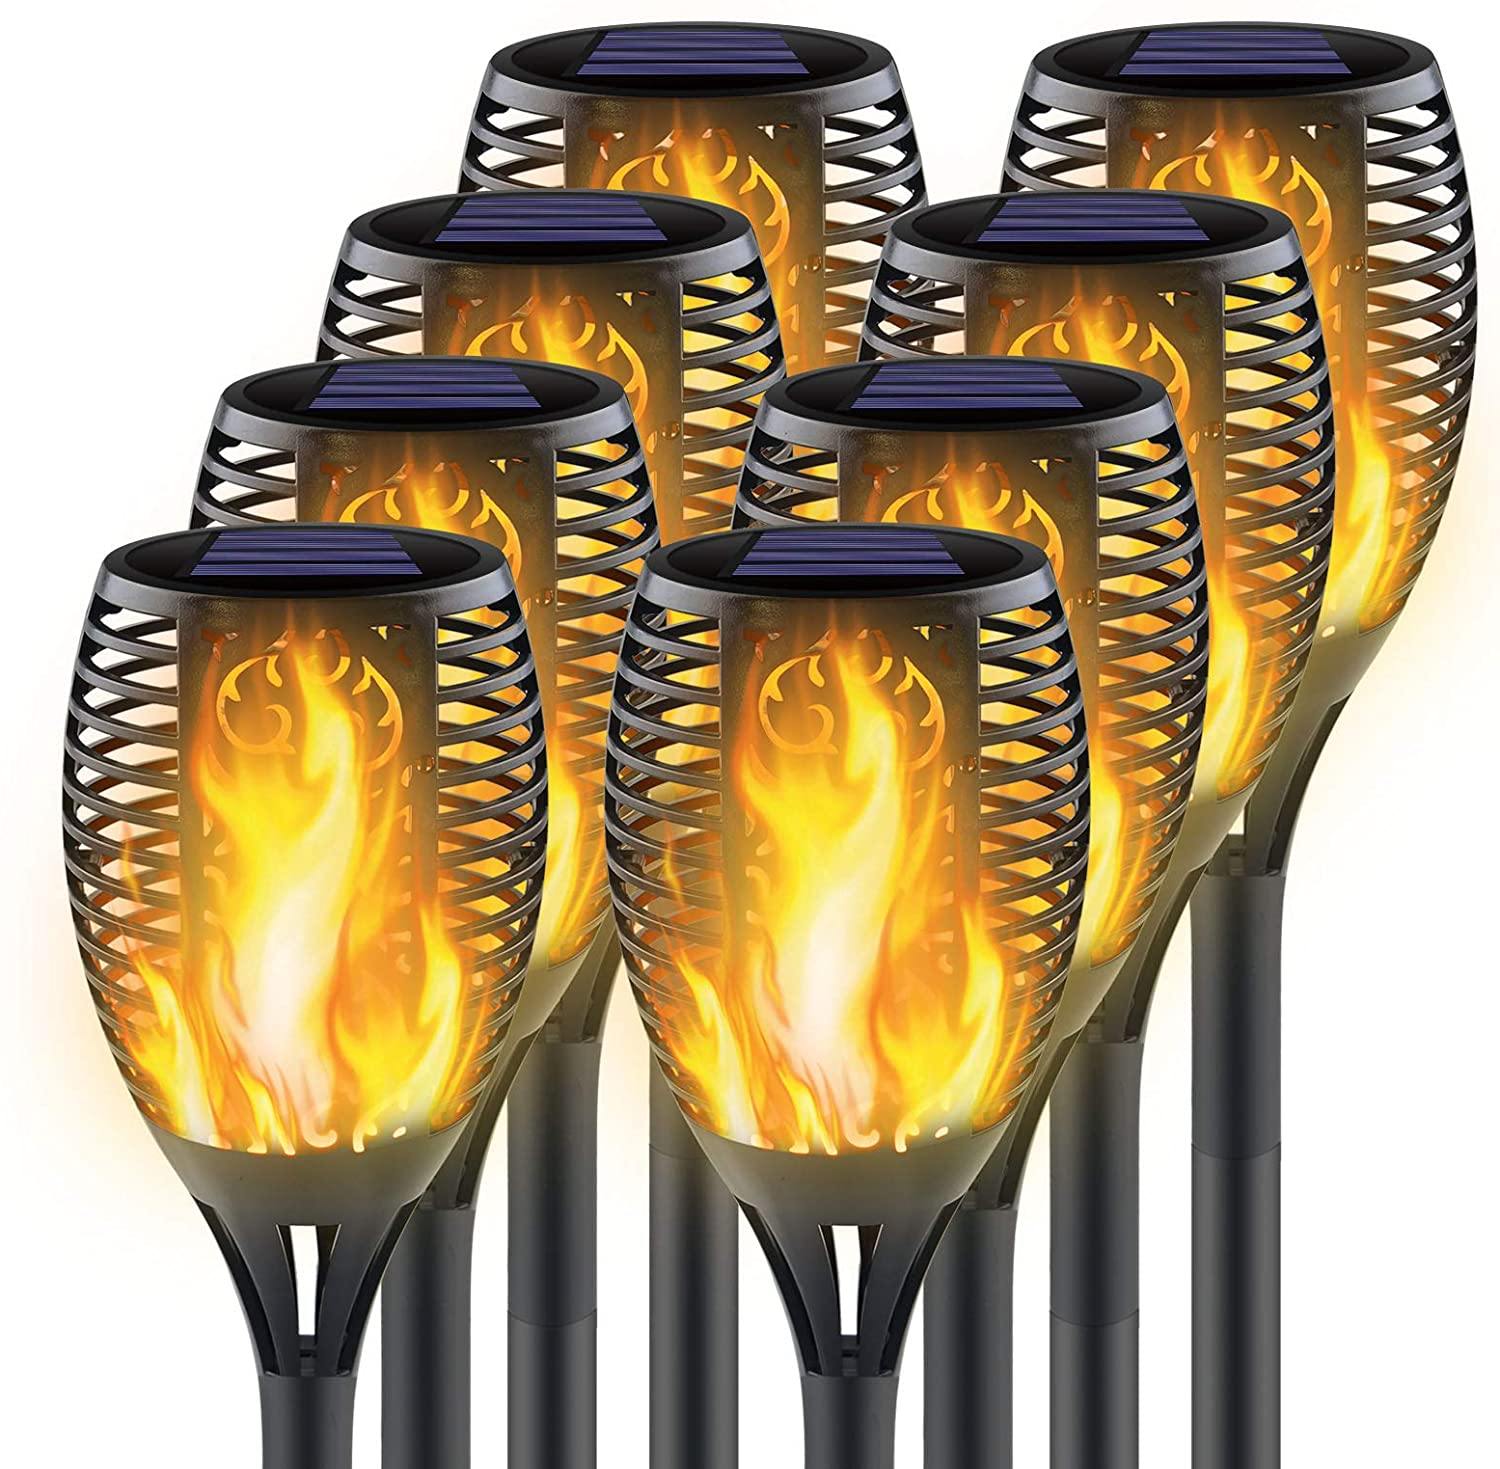 Best Solar Flame Flickering torch Lights For Sale